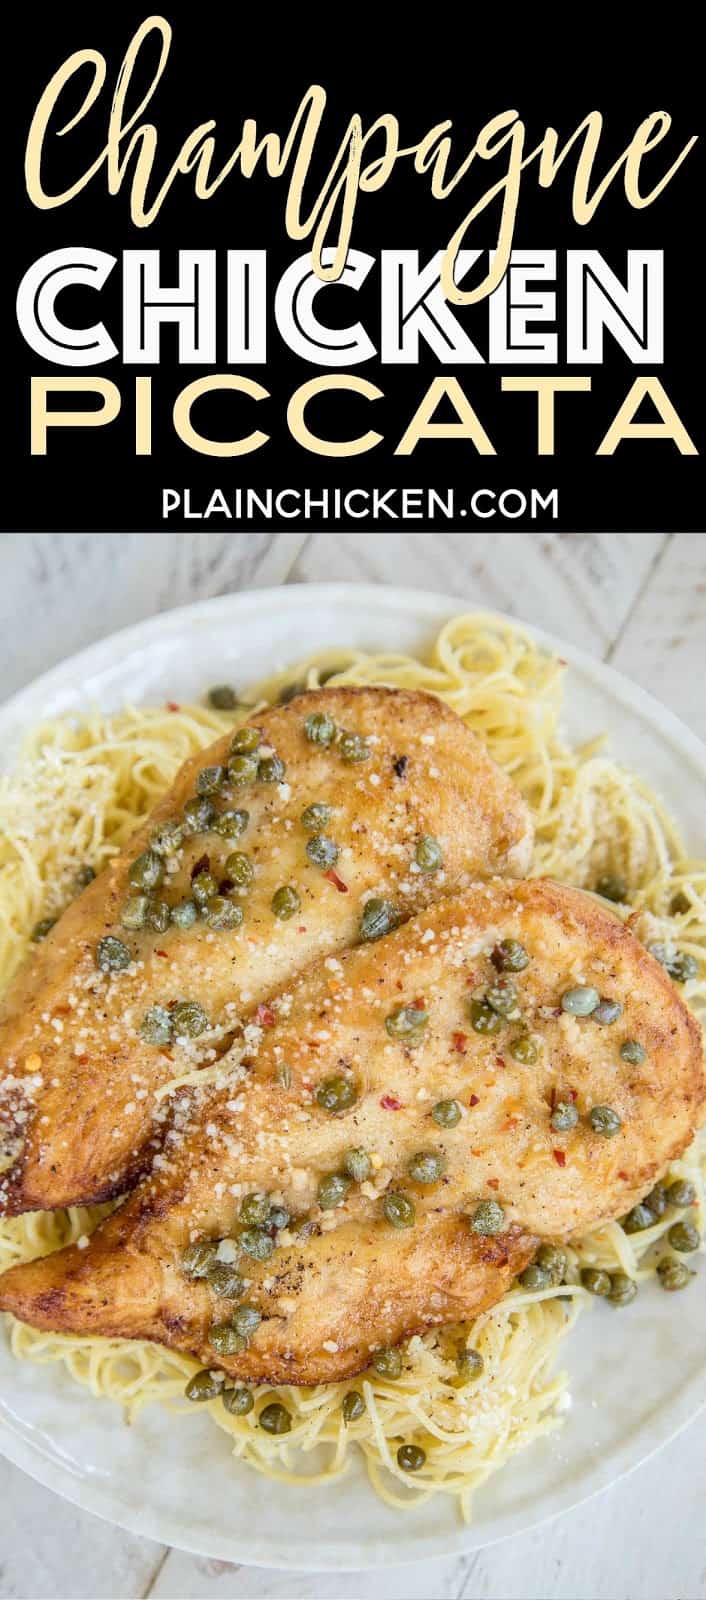 Champagne Chicken Piccata - no one will ever guess how easy this is! With a few simple ingredients you can make a restaurant quality meal! Chicken, garlic, butter, lemon, champagne and capers. Ready in about 10 minutes! This is the most requested chicken dish in our house! #chicken #easychickenrecipe #chickendinner